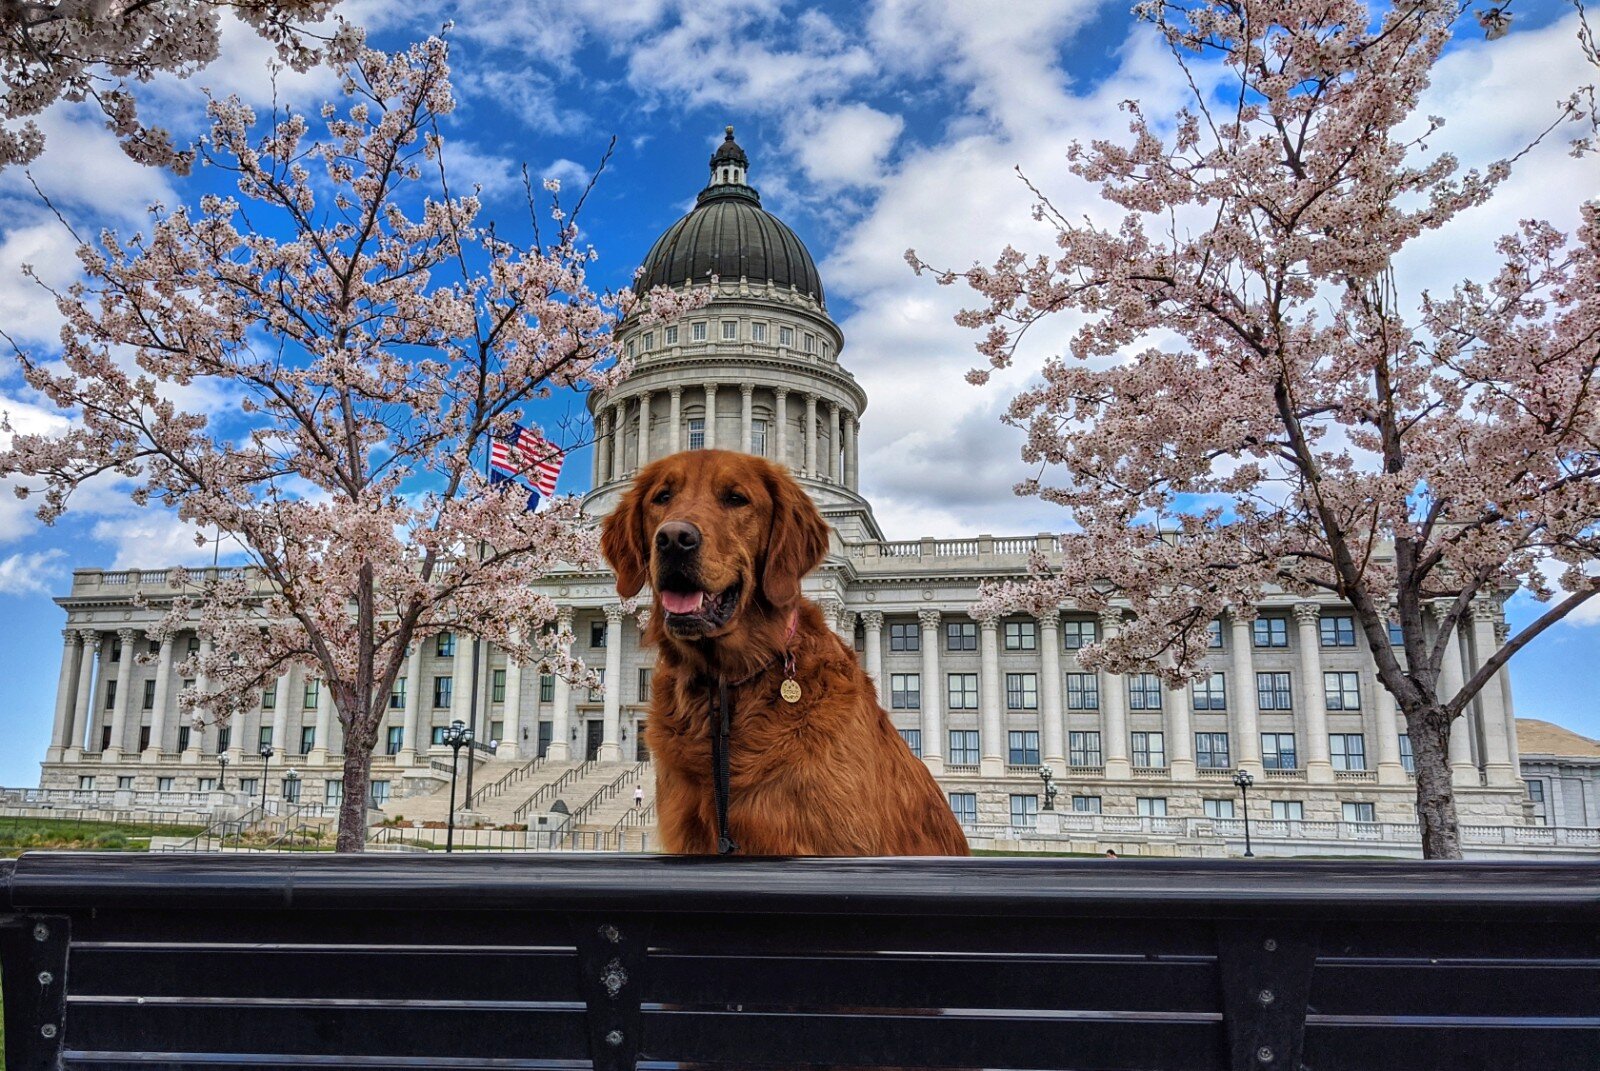 A golden retriever sits on a bench in front of the Utah State Capitol Building in the spring